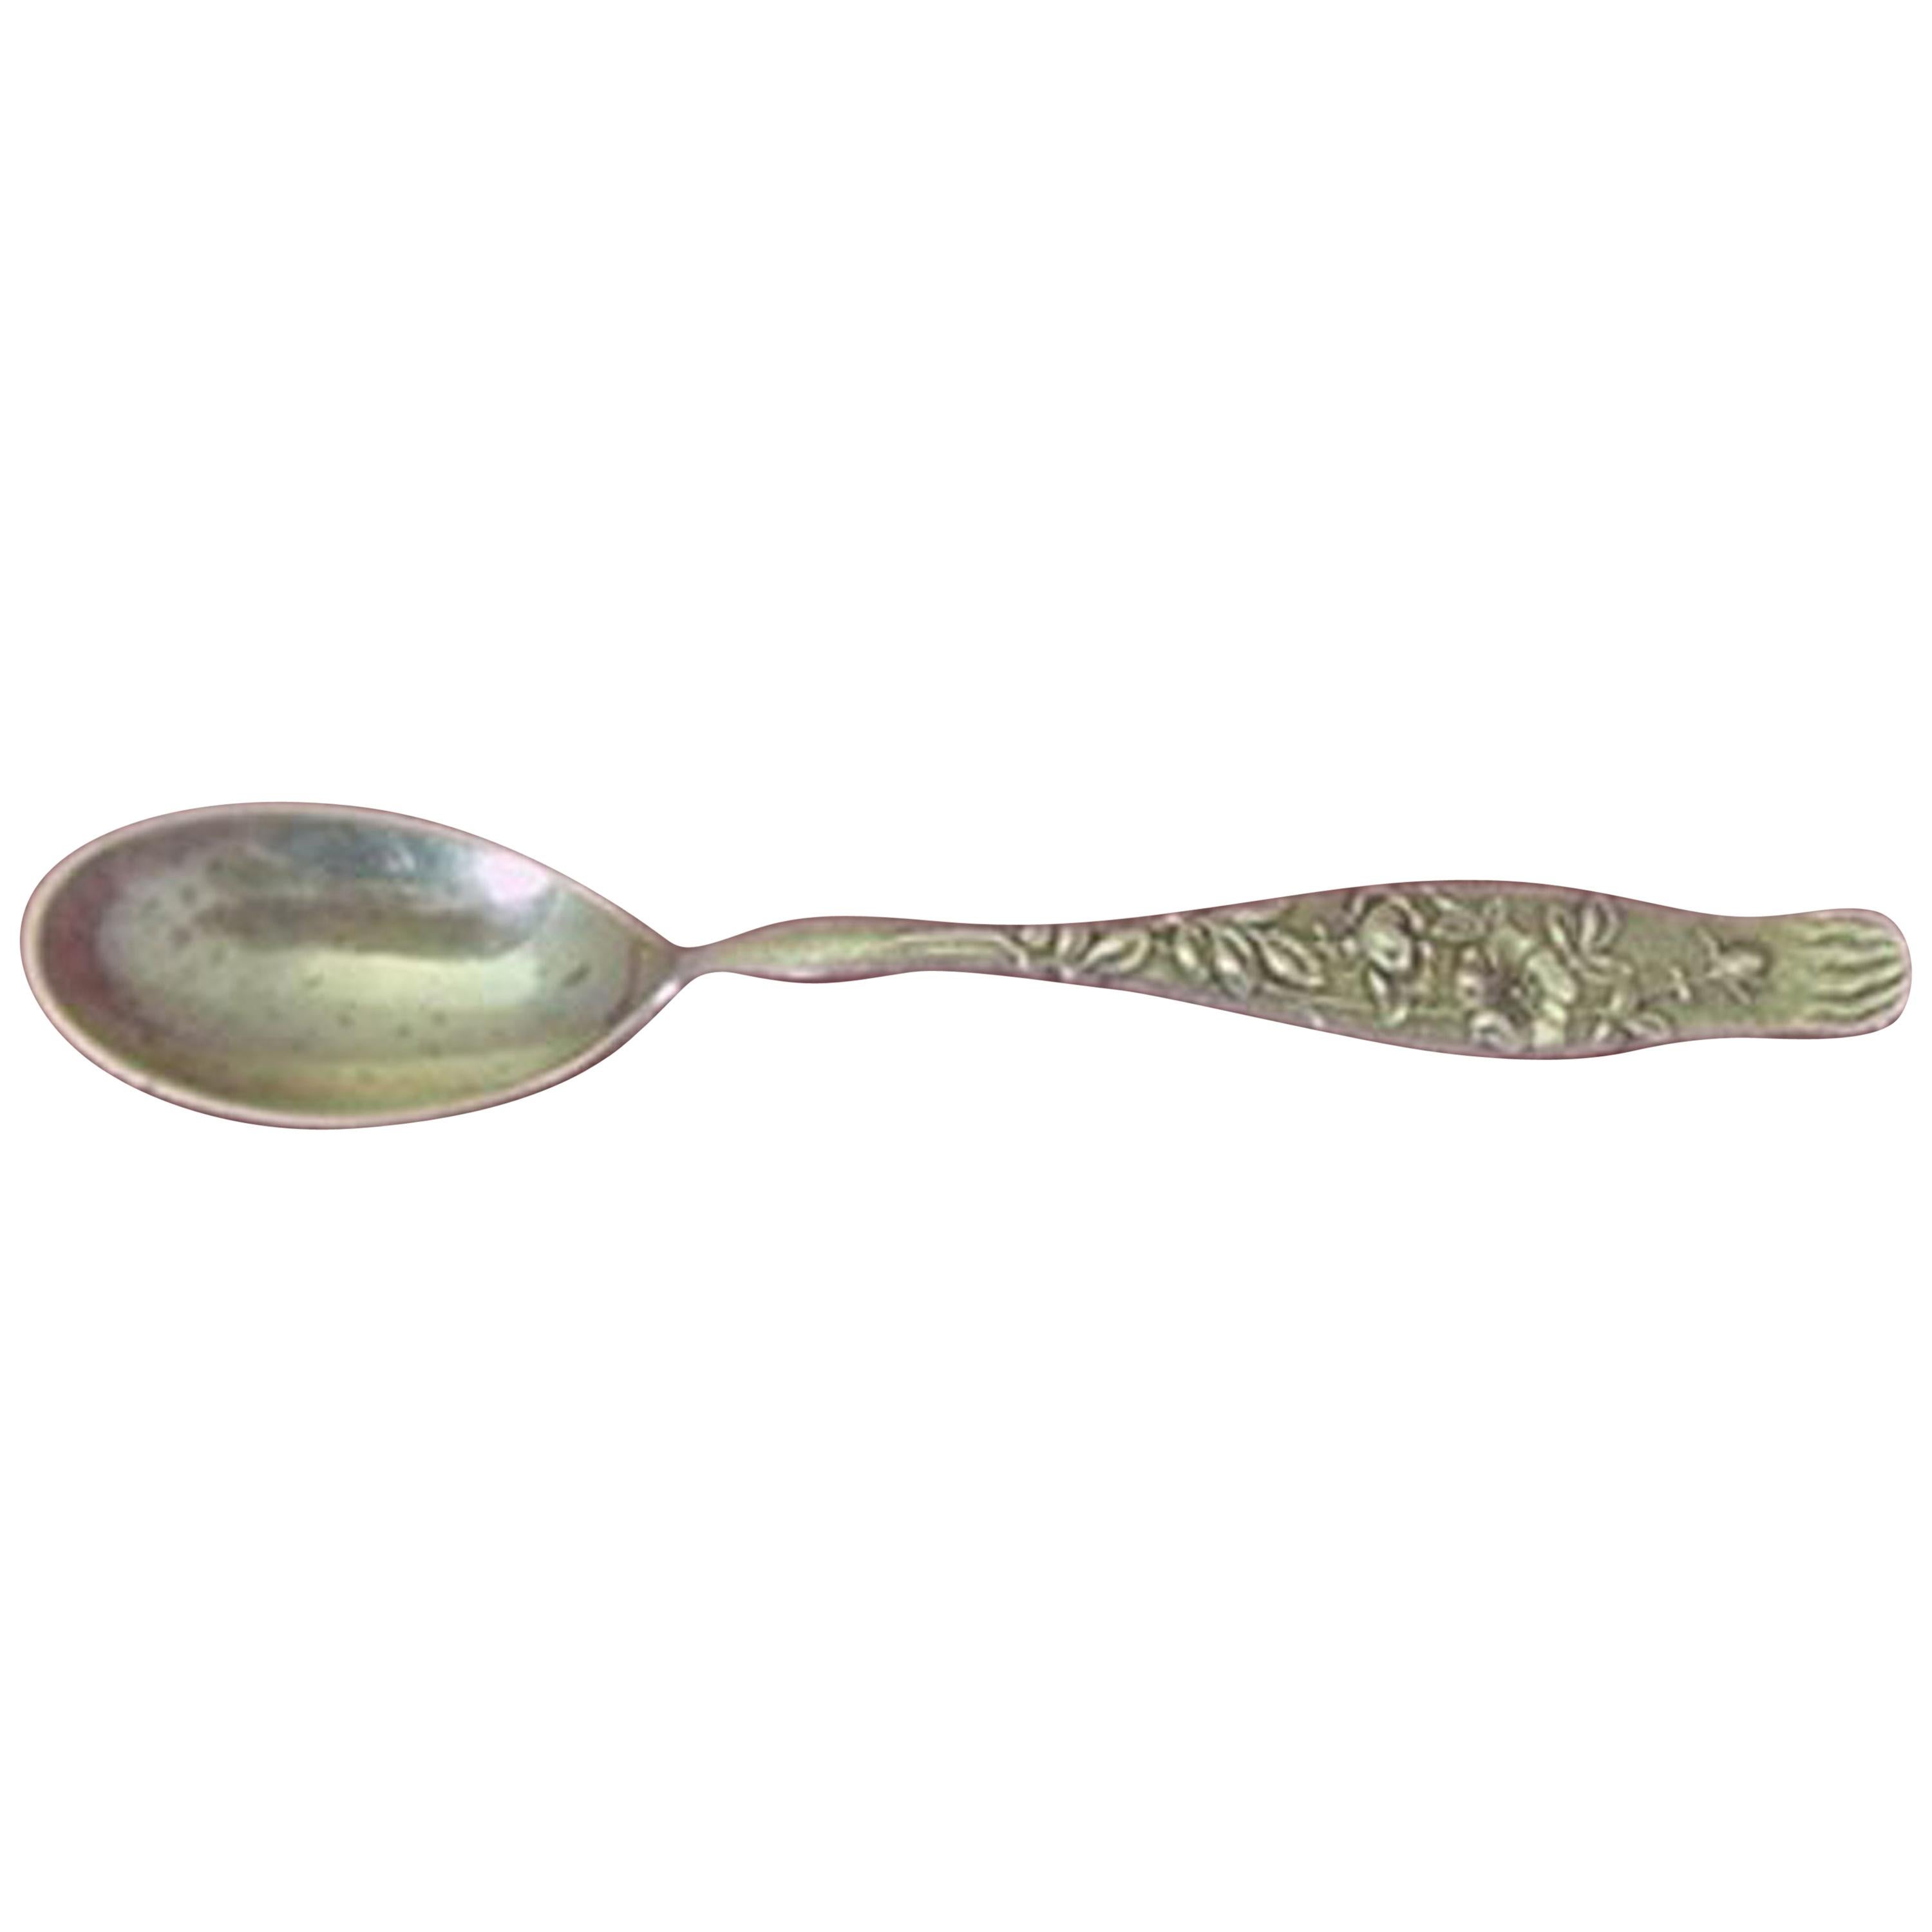 Vine by Tiffany & Co. Sterling Silver Demitasse Spoon